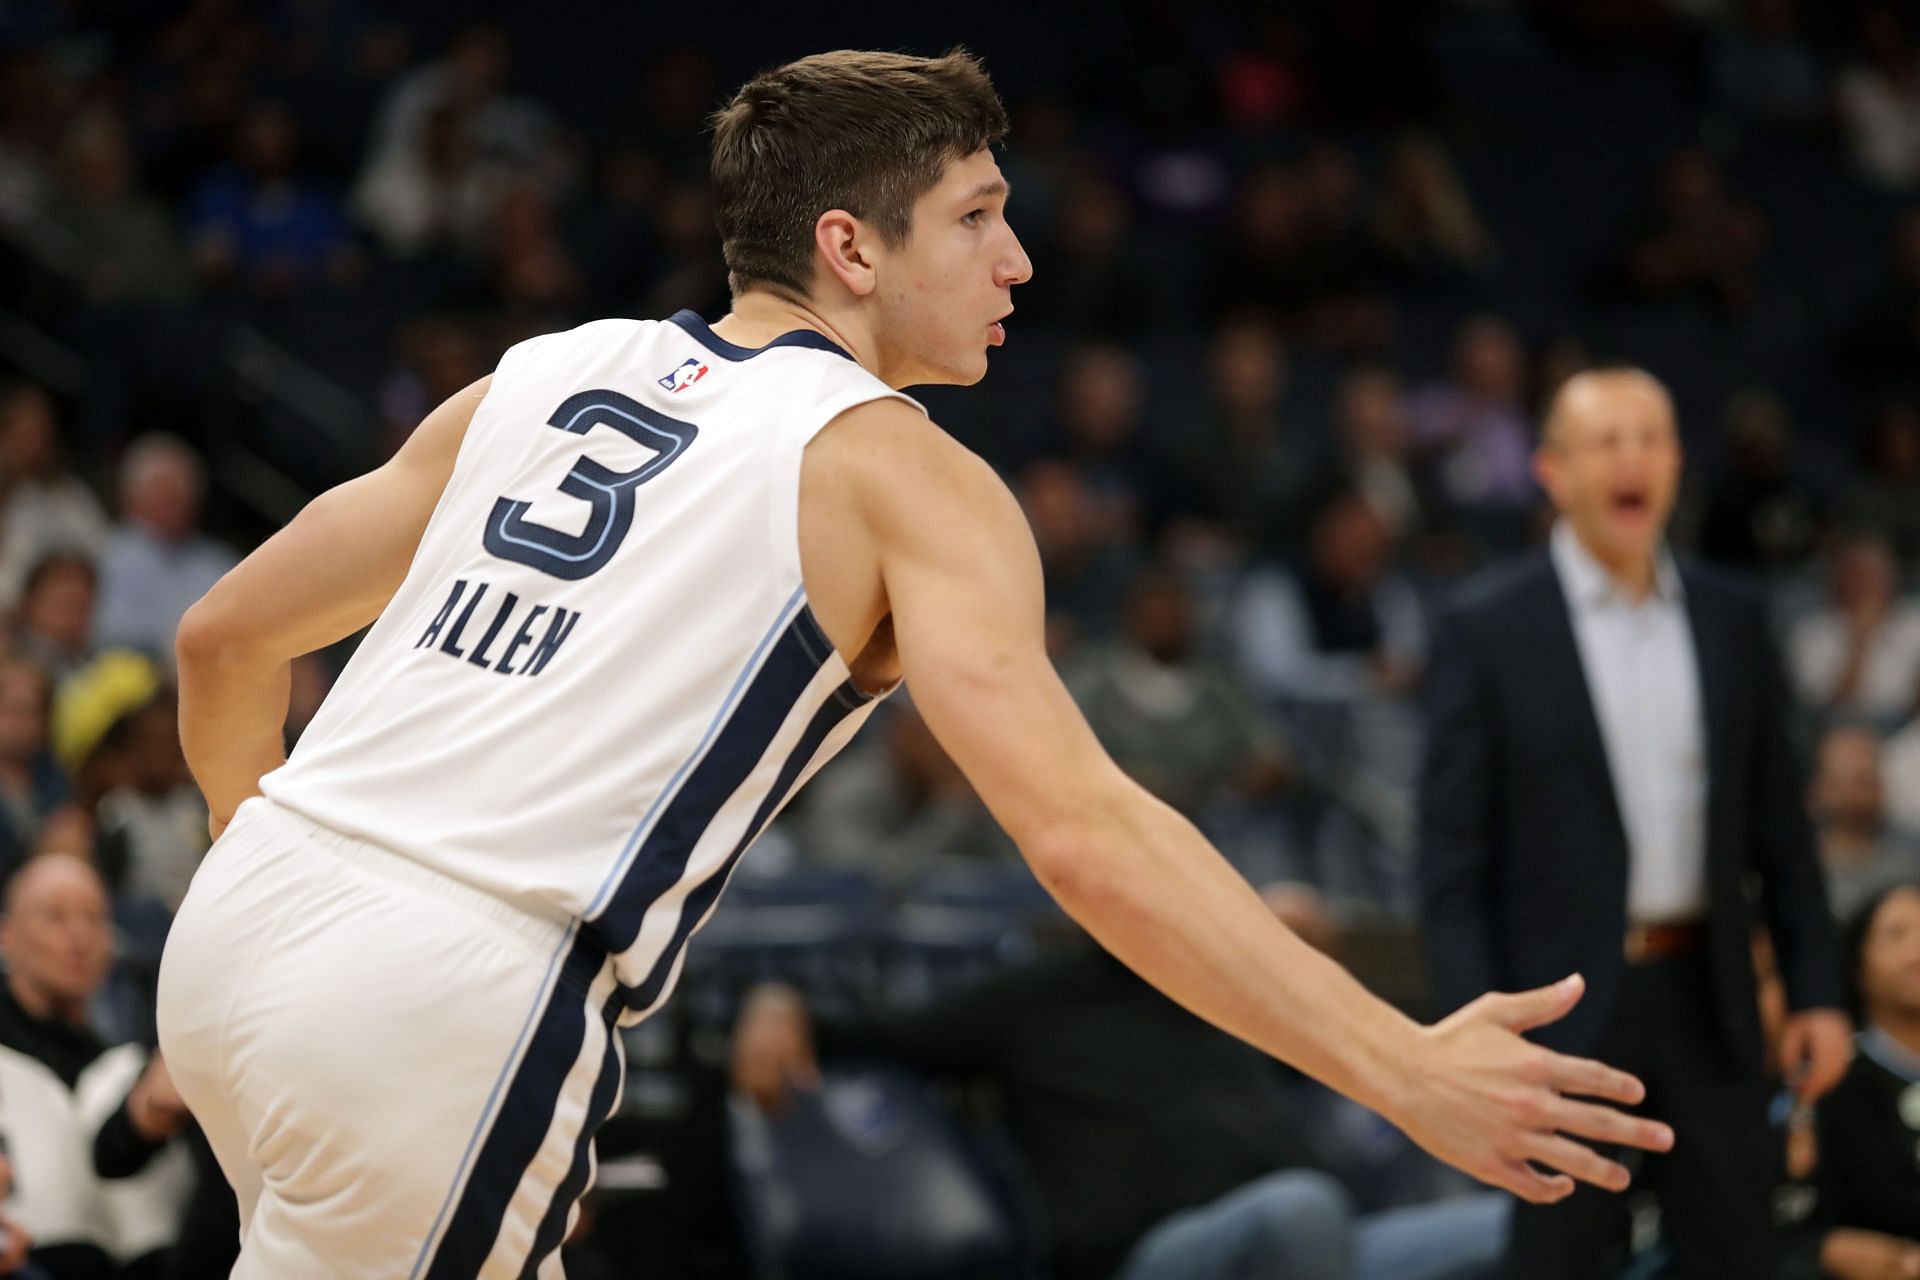 Grayson Allen in action during a game